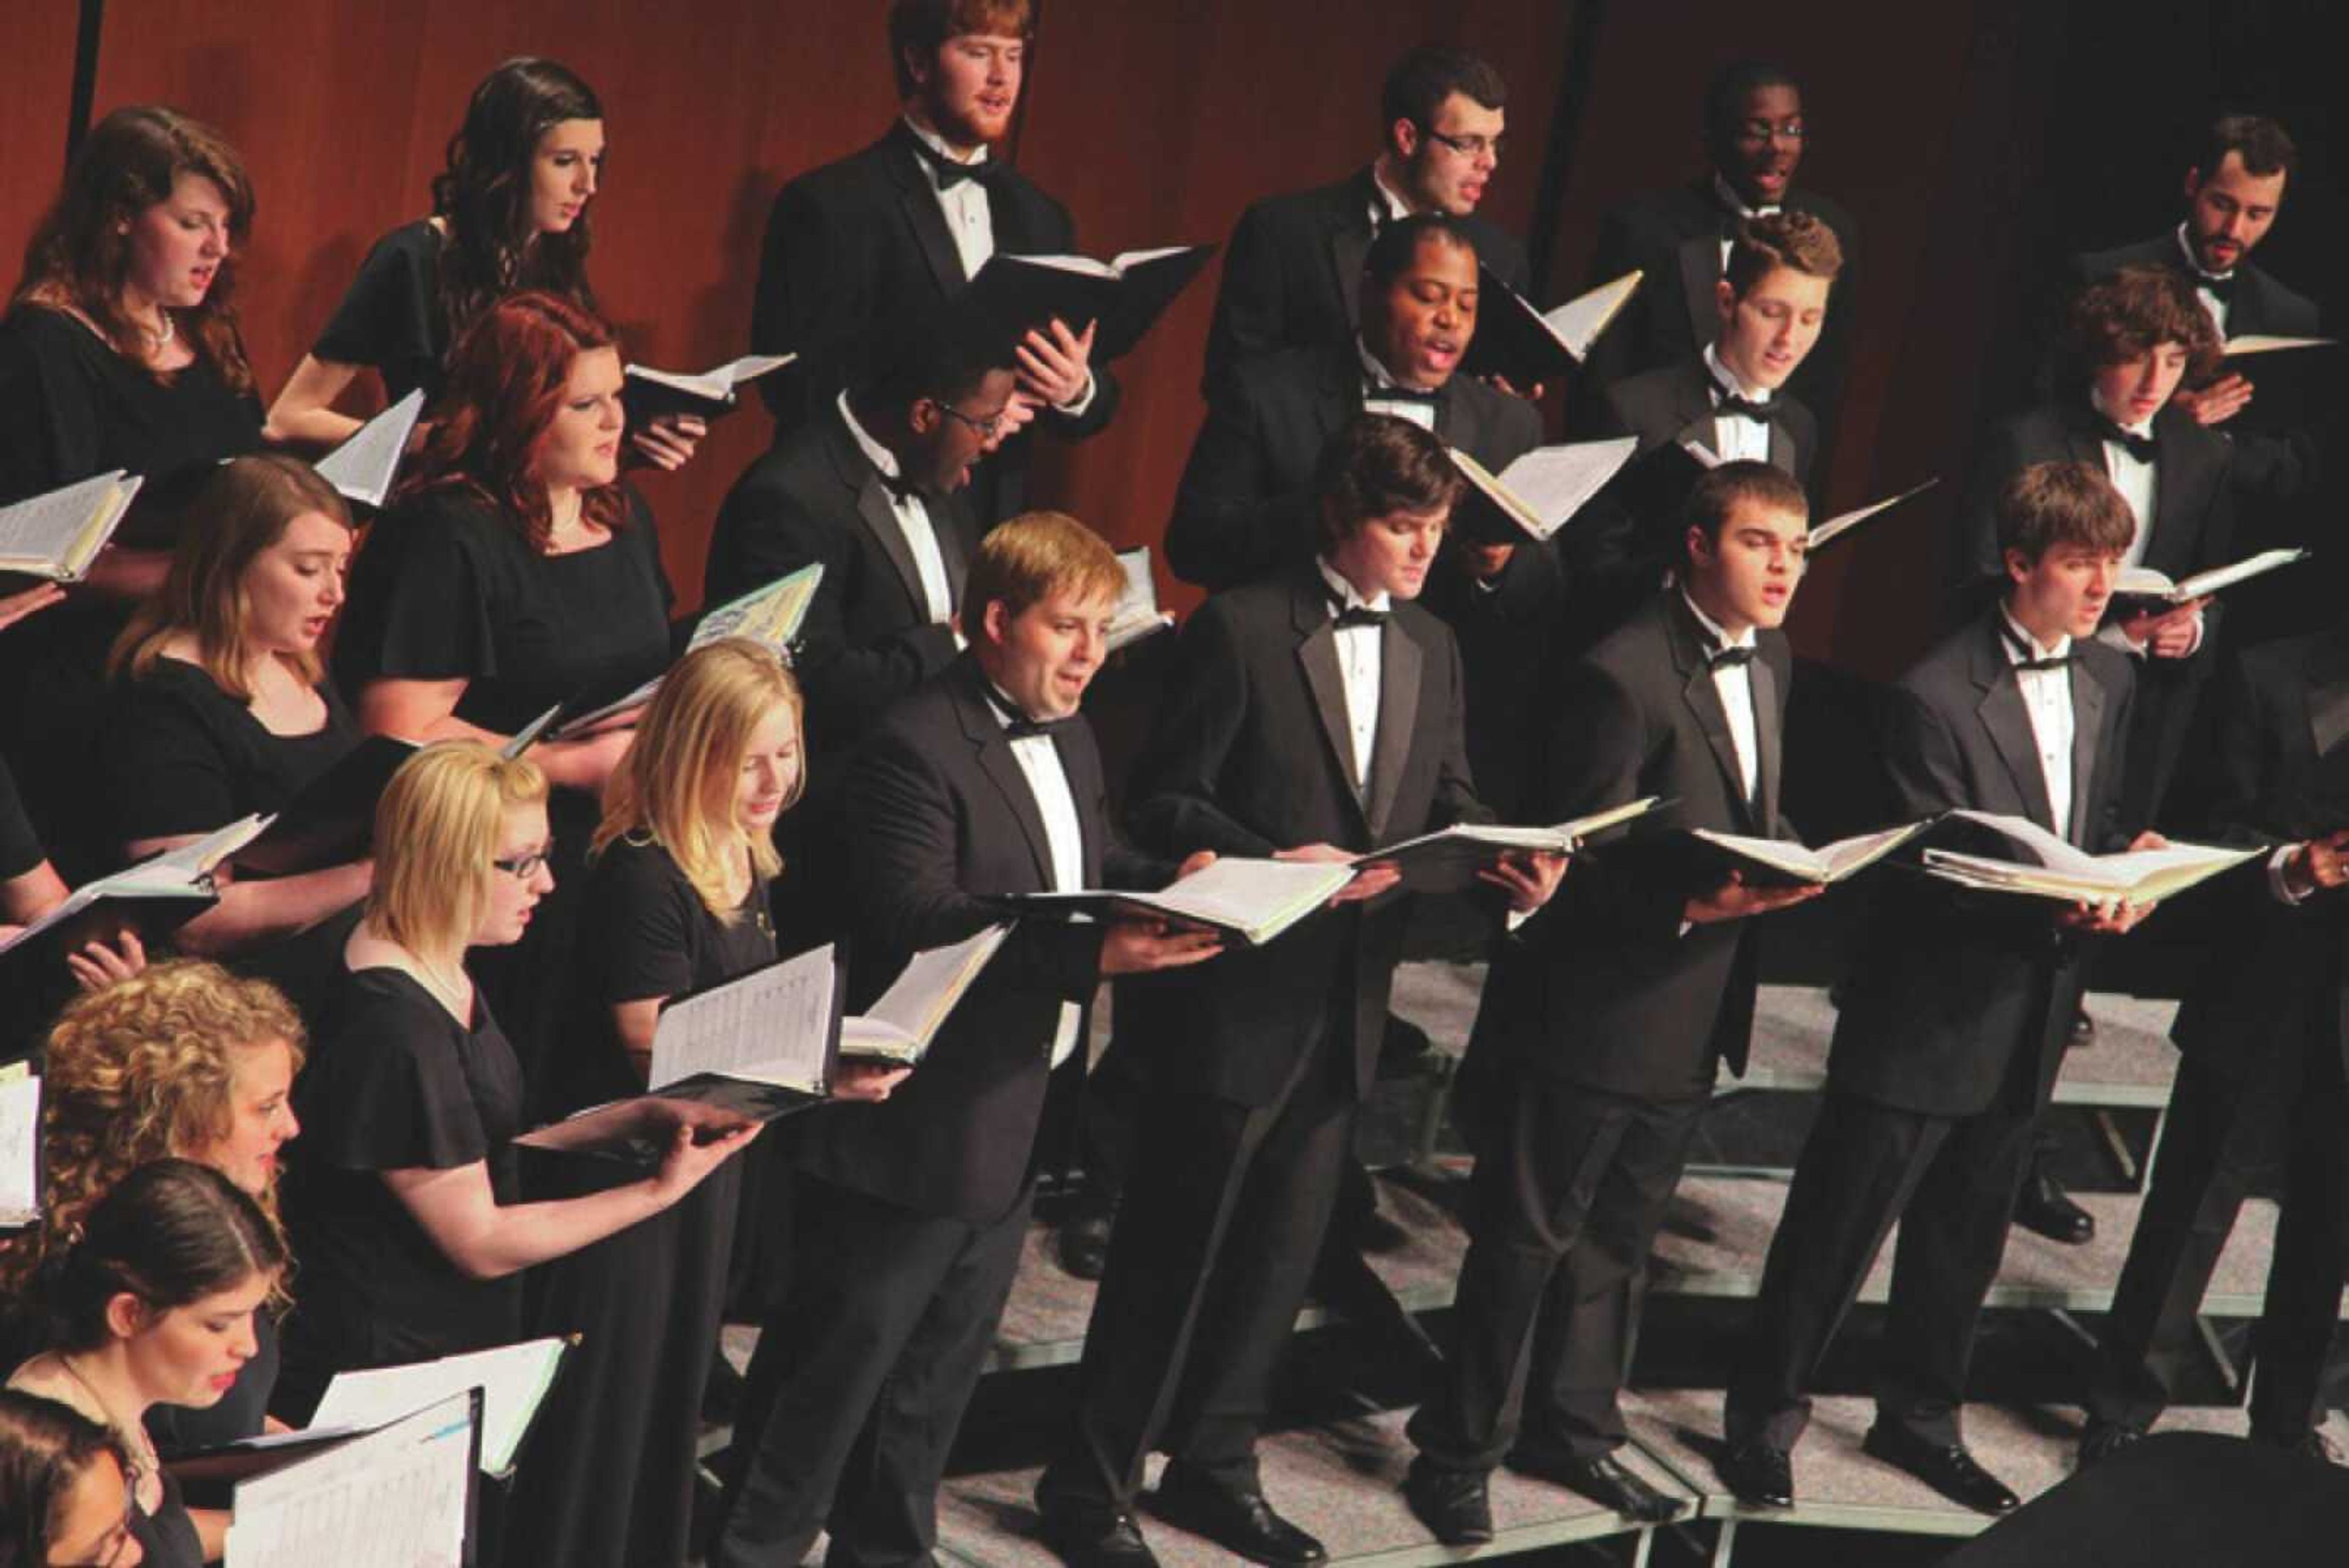 The University Choir and Chamber Choir at Southeast Missouri State University will have a concert all together at 7:30 p.m. Nov. 10 in the Robert F. and Gertrude L. Shuck Music Recital Hall.